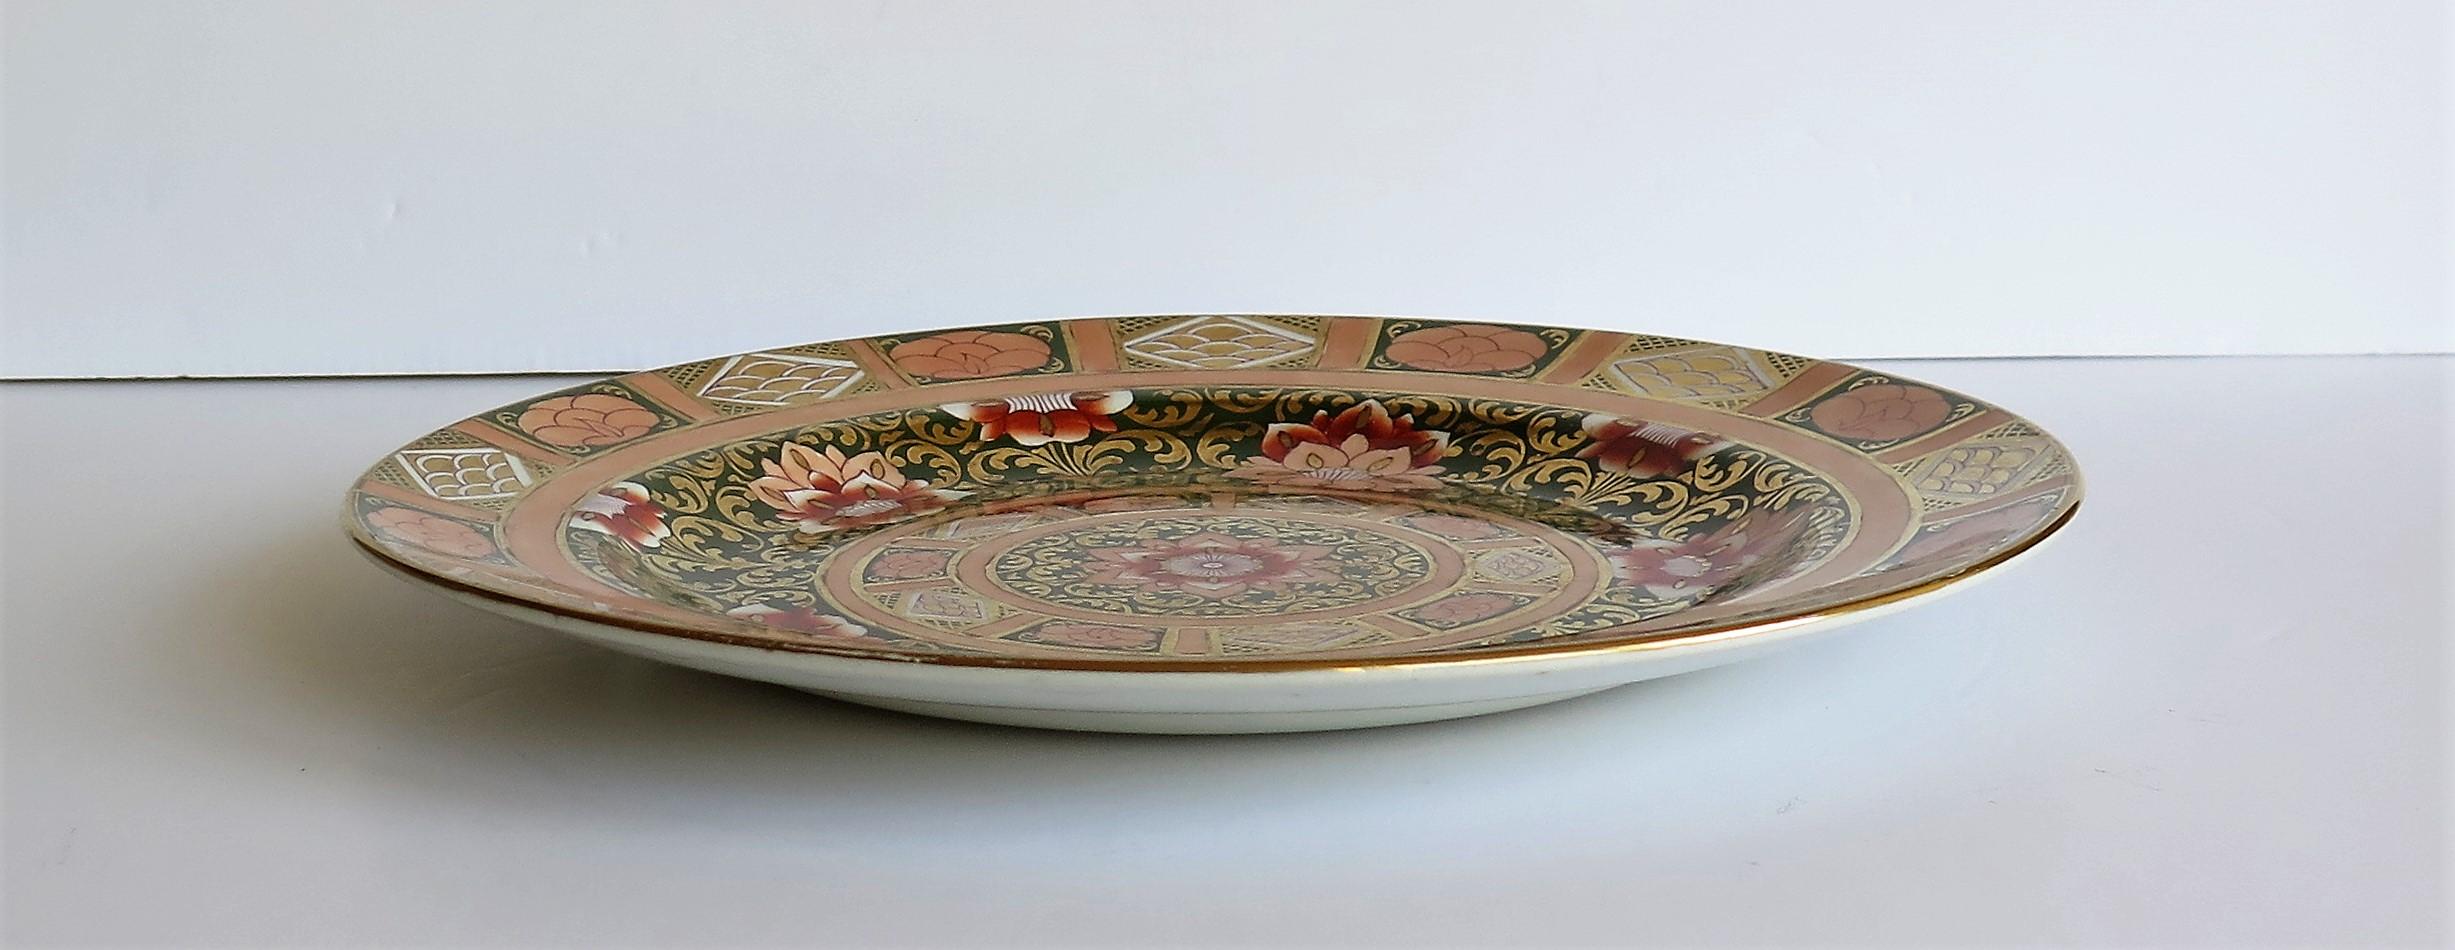 Masons Ironstone Dinner Plate with finely hand gilded pattern, circa 1895 For Sale 3